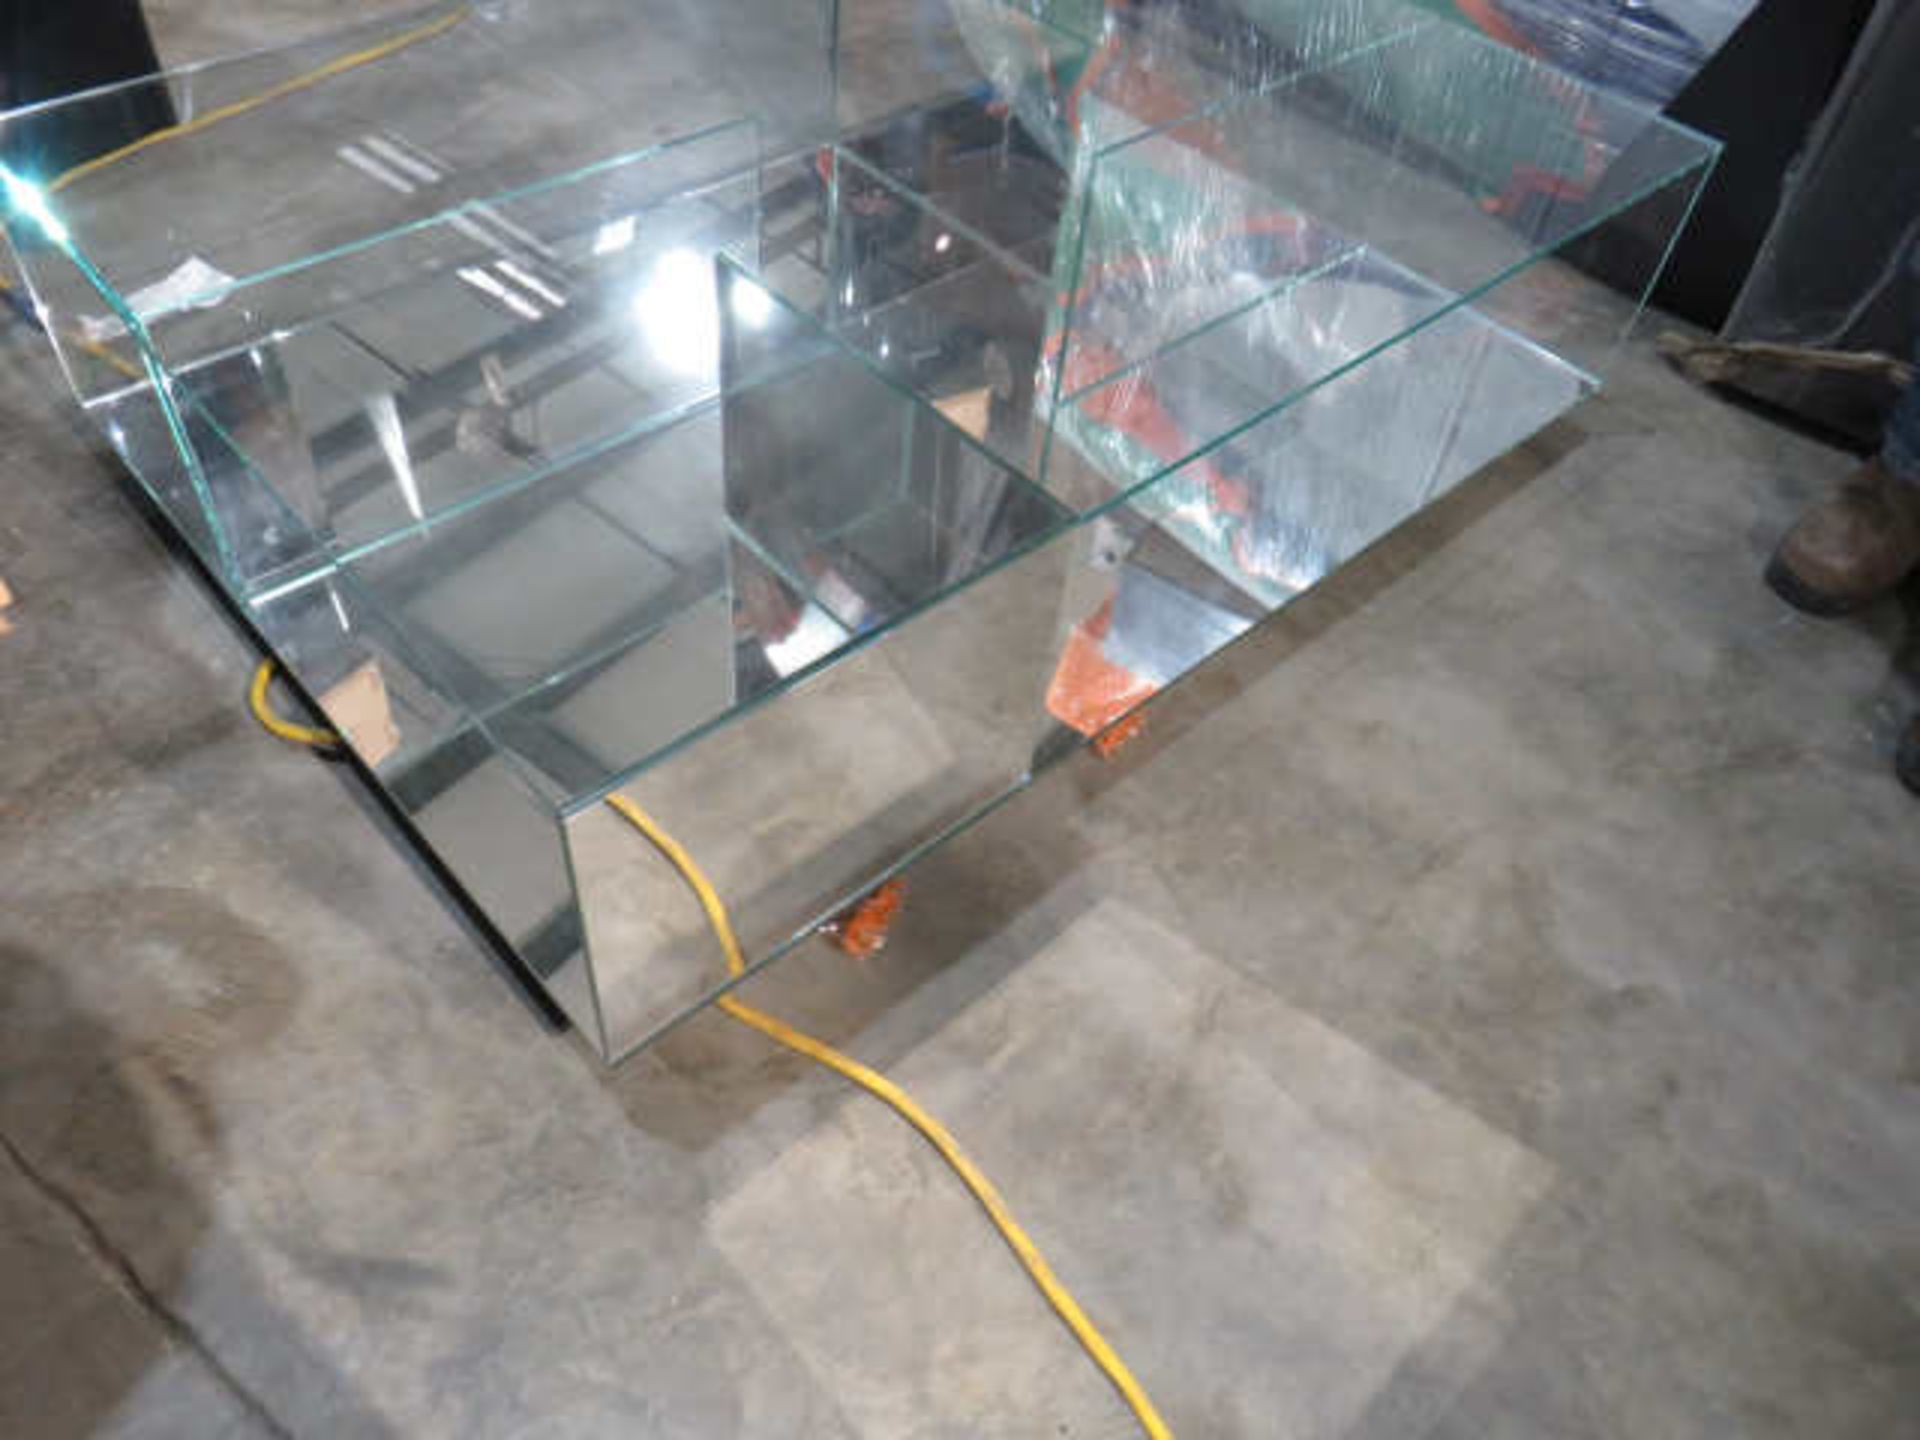 Glass cube coffee table/display table, on casters, by Napzzui (note one of the glass panels on ... - Image 2 of 3